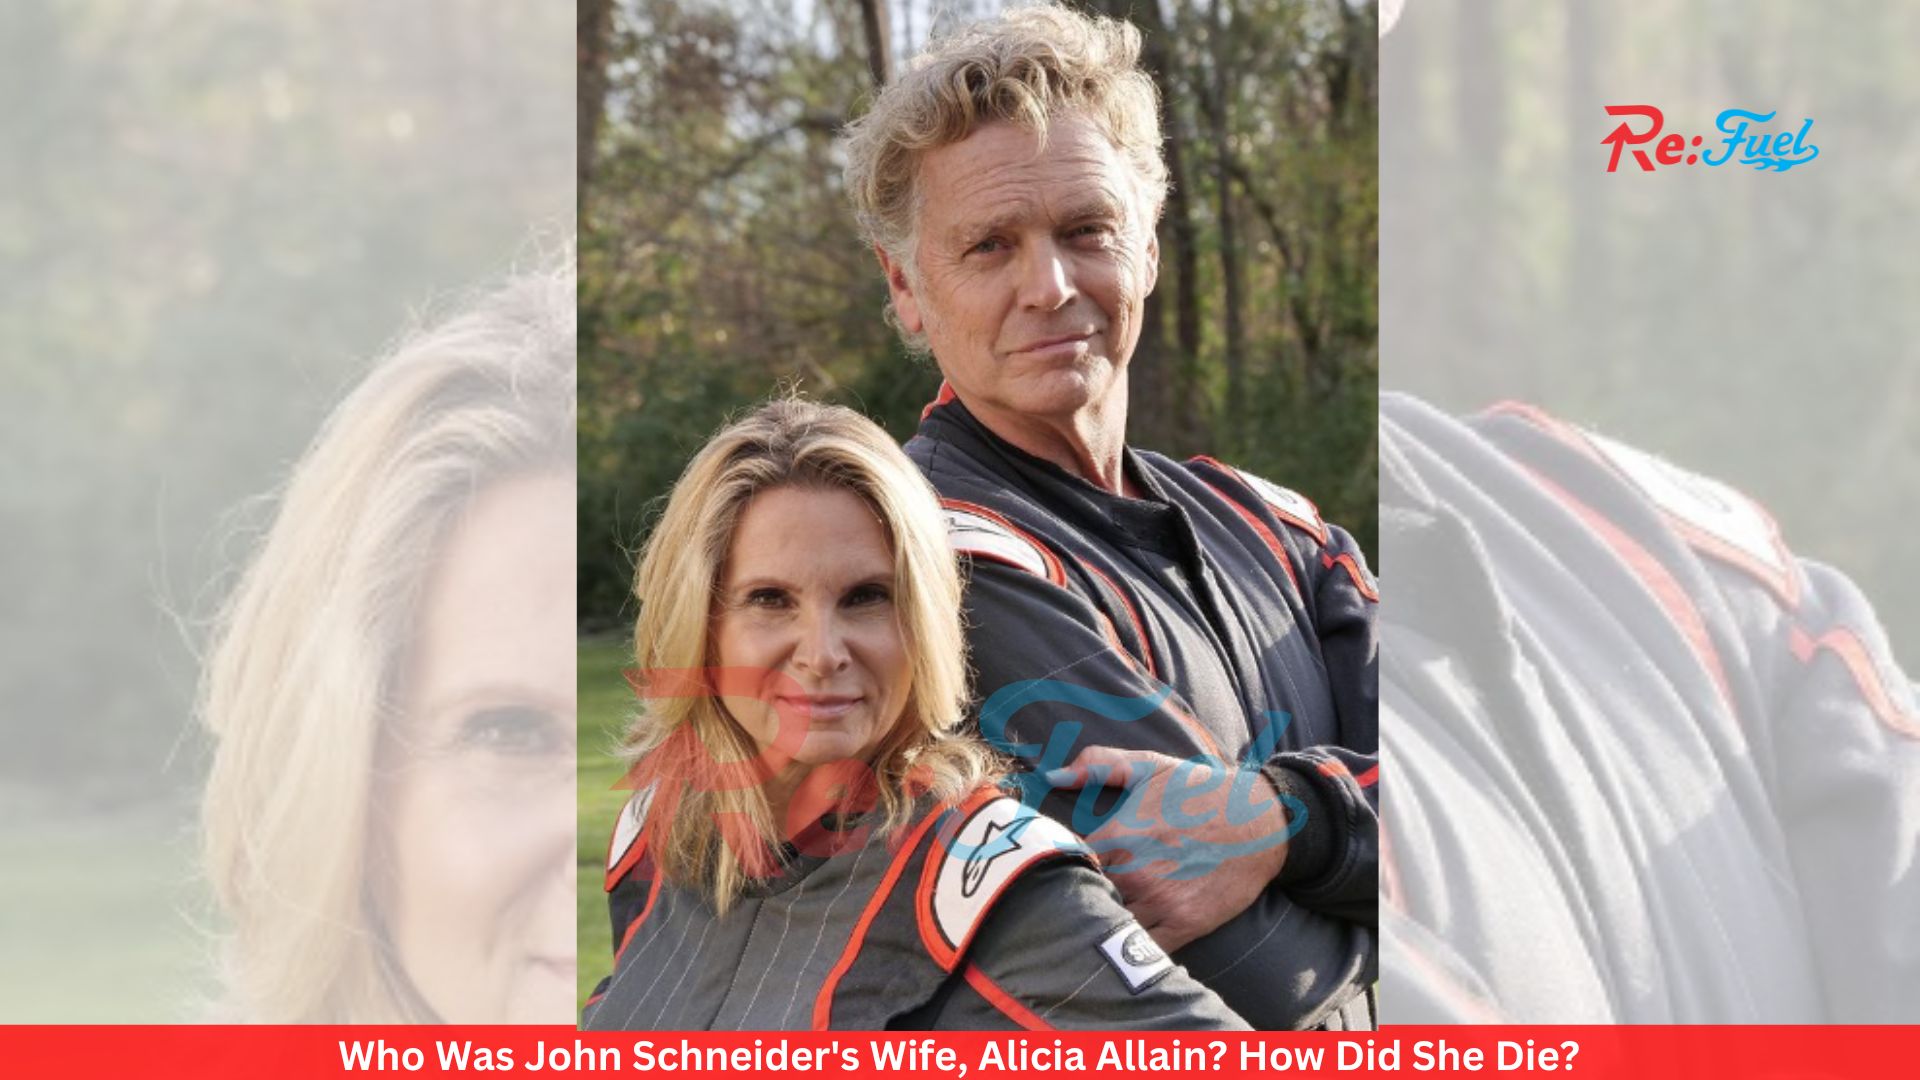 Who Was John Schneider's Wife, Alicia Allain? How Did She Die?